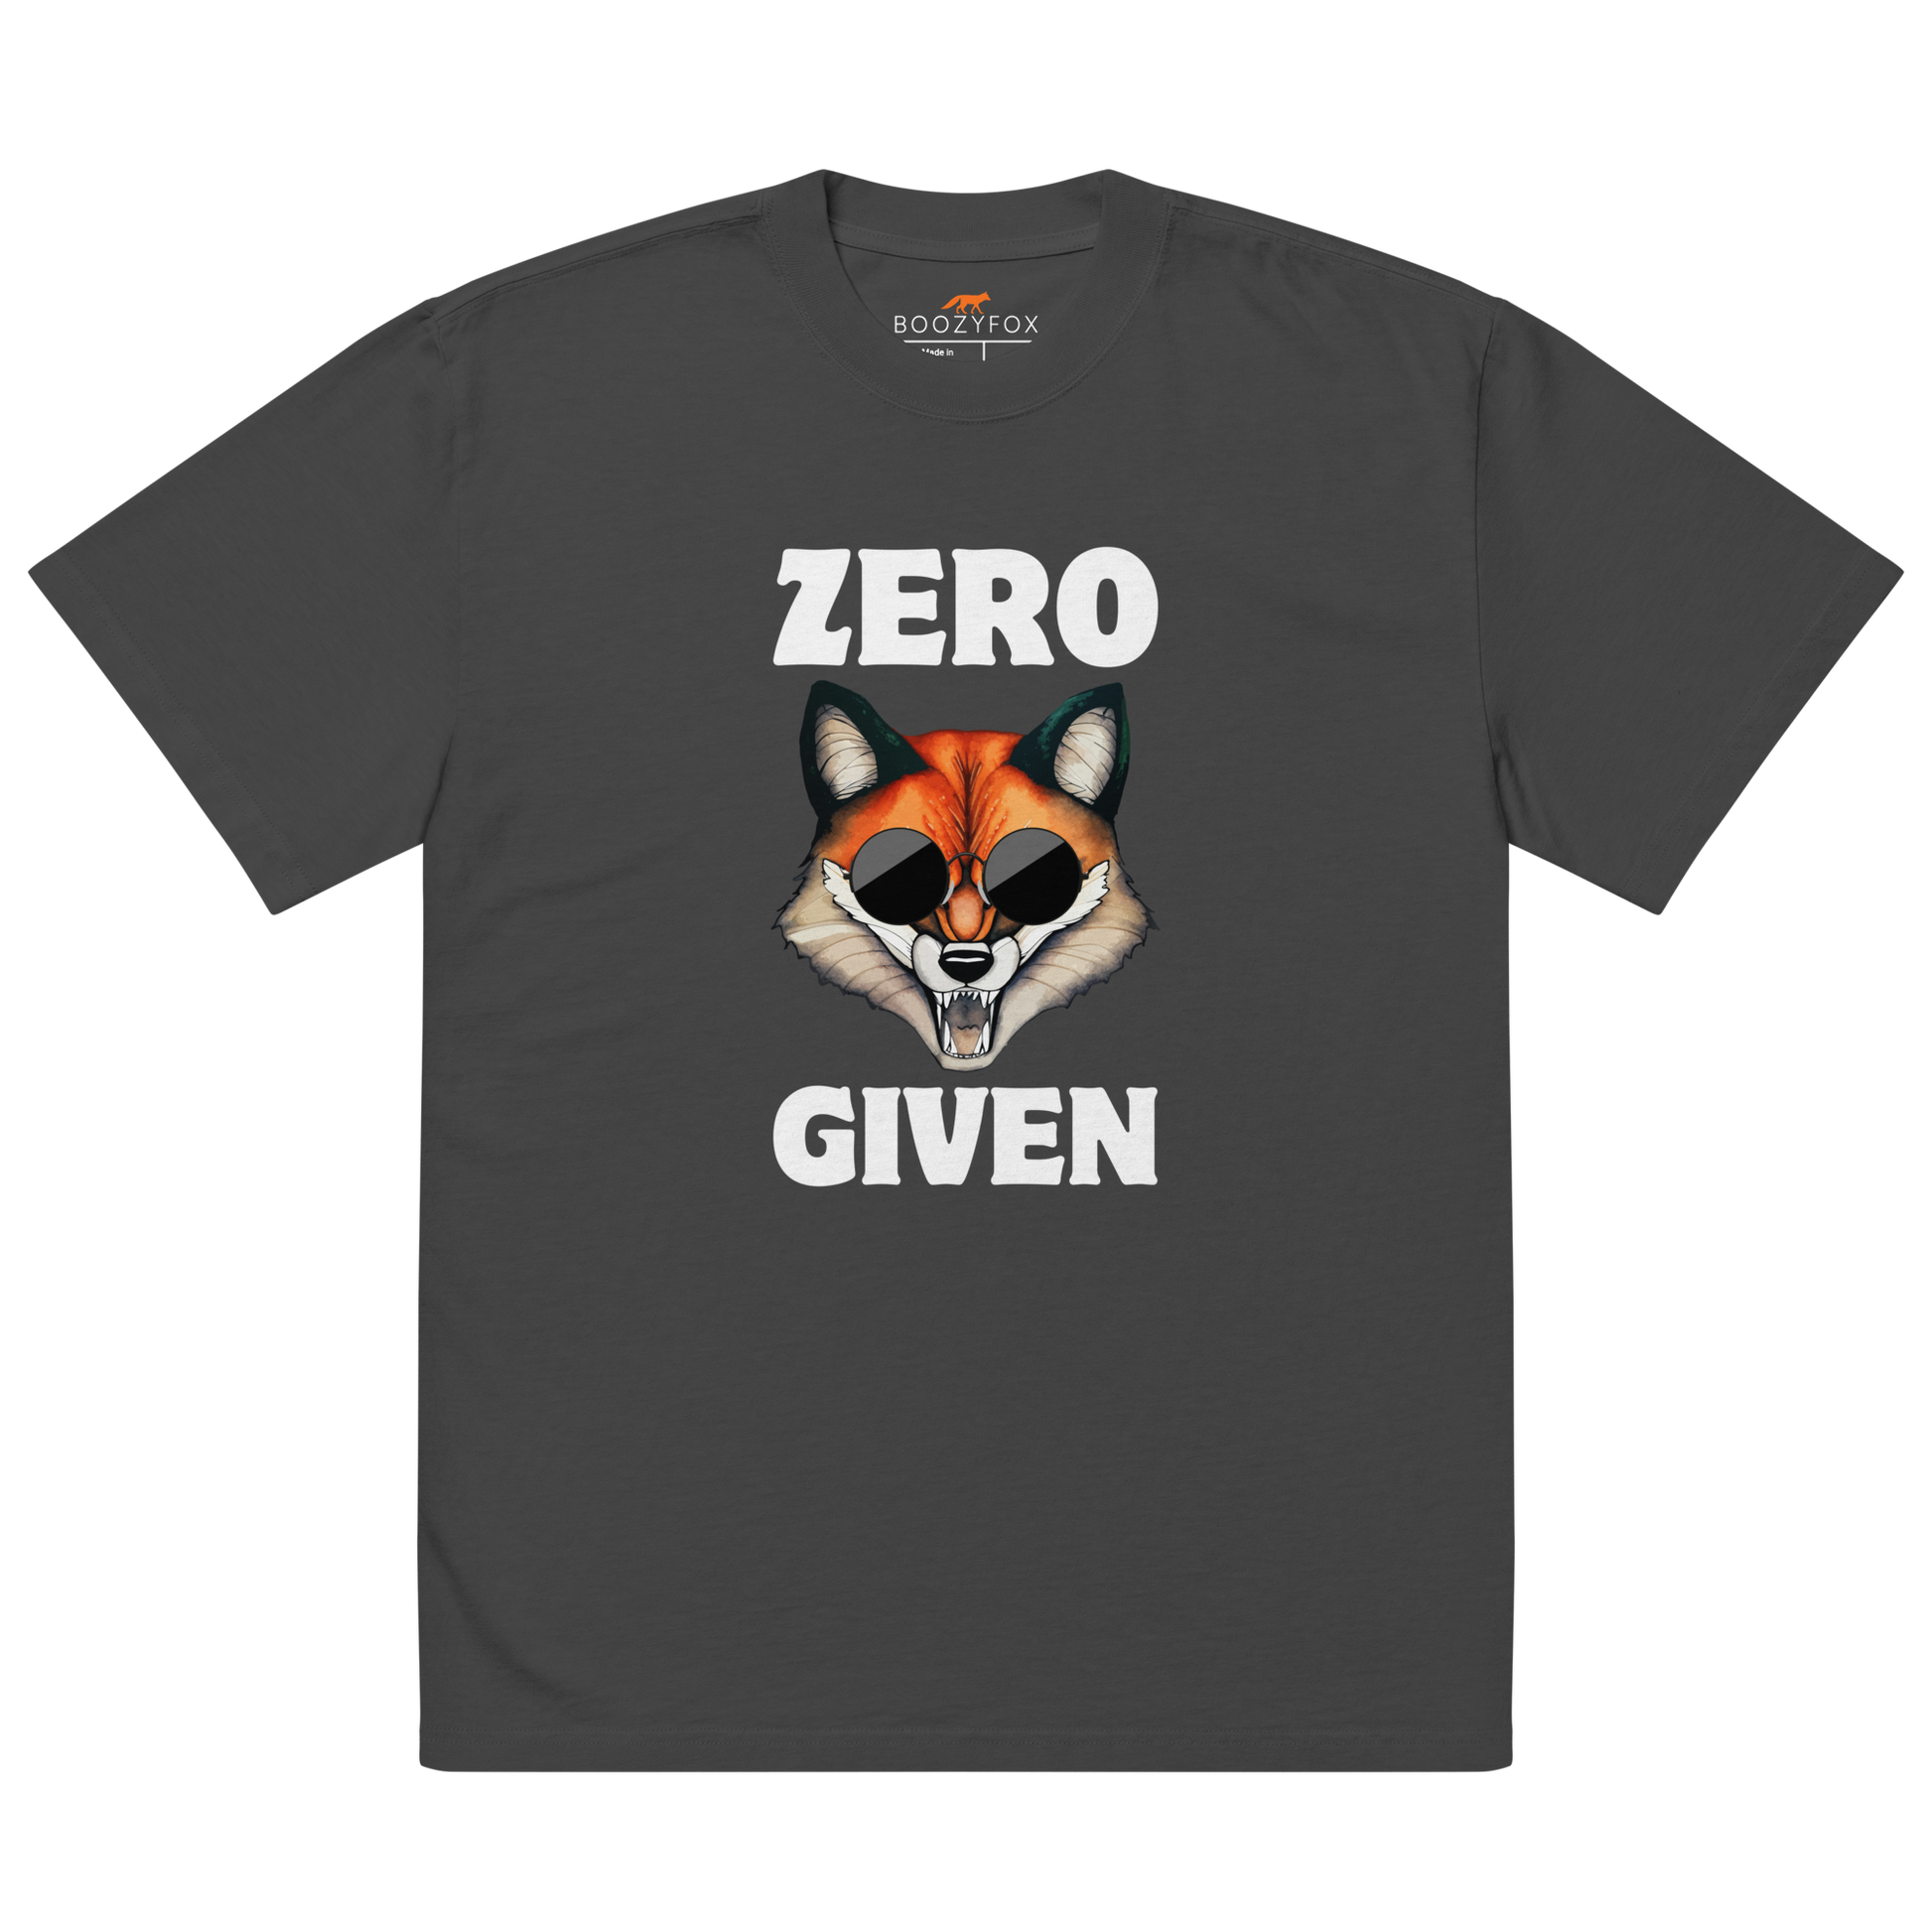 Faded Black Fox Oversized T-Shirt featuring a Zero Fox Given graphic on the chest - Funny Graphic Fox Oversized Tees - Boozy Fox